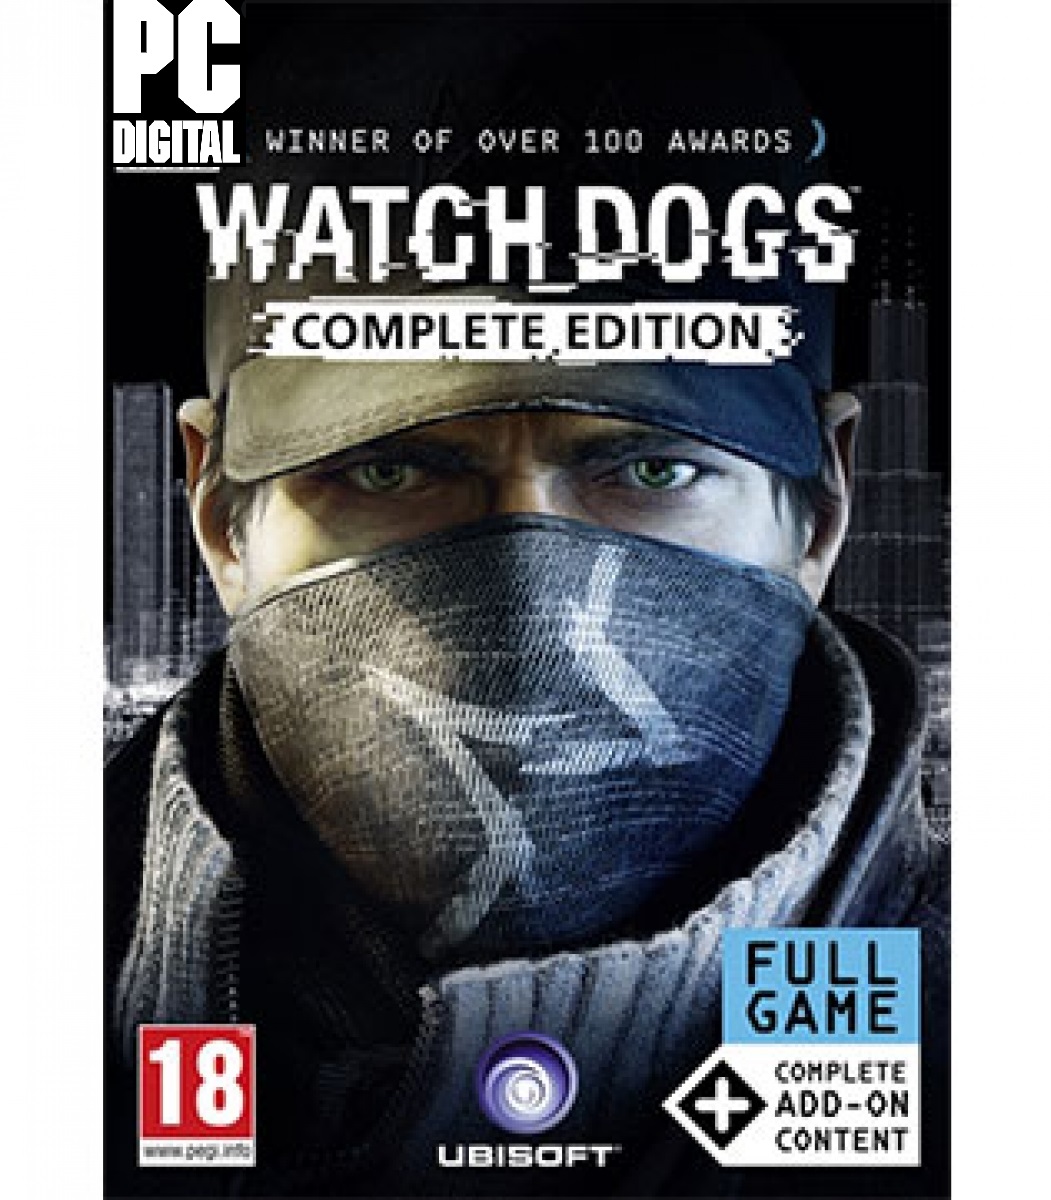 Watch_dogs™ – Complete Edition PC (Digital)